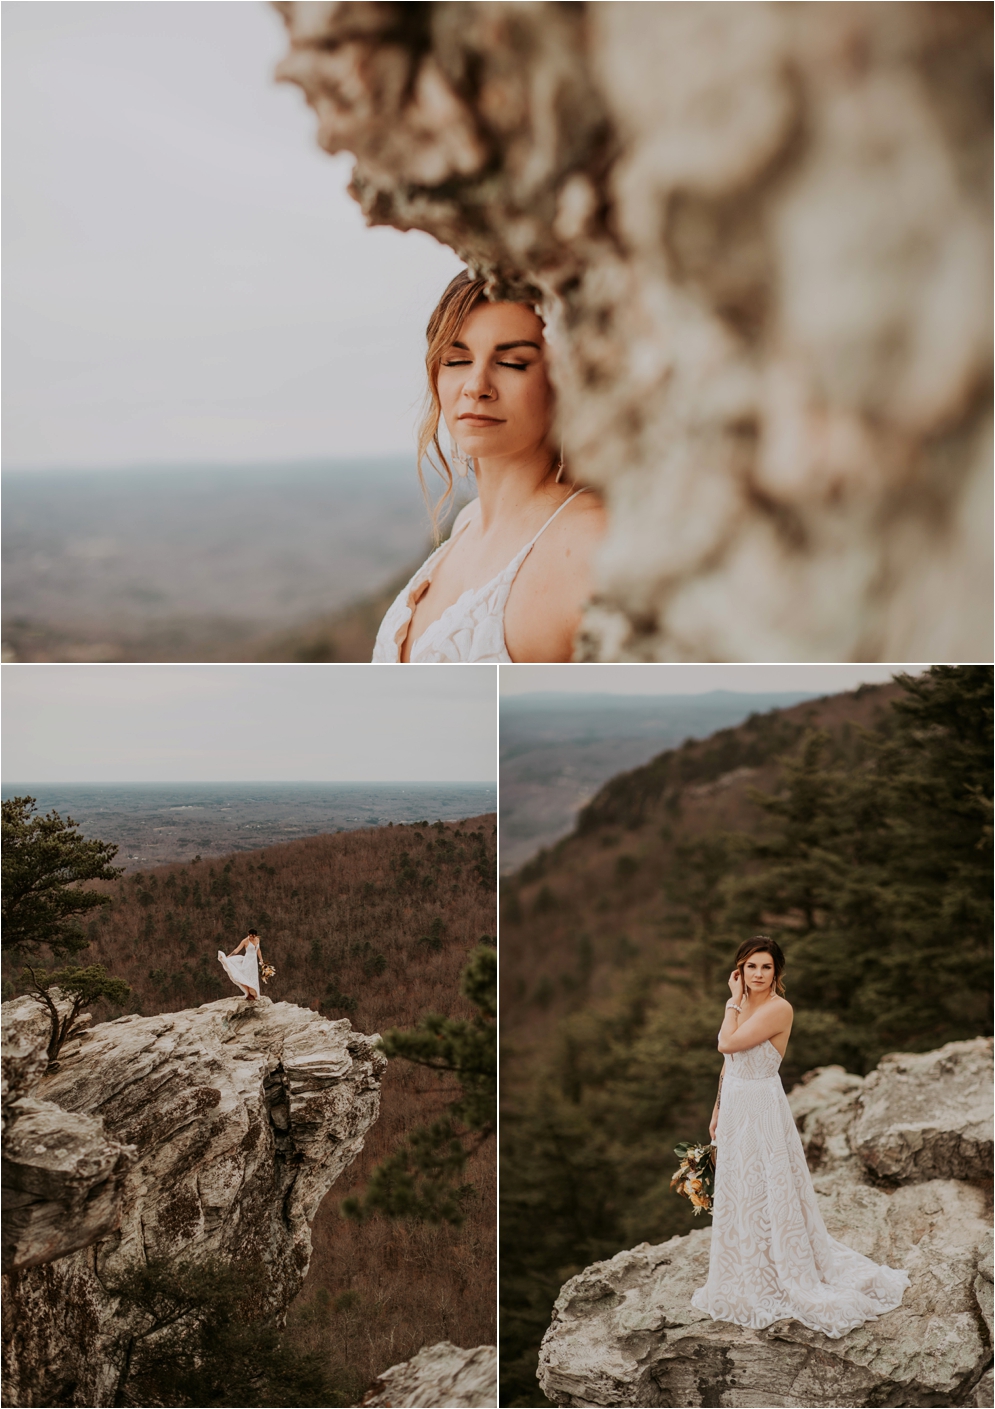 Hanging Rock State Park, Hayley Paige Wedding Dress, Southern Blooms, Carbon Compass Beauty Bar, Wildflower Bridal, Modern Boho Bride, Bohemian Bride, Bridals, See You Clayter, Connection Photography, Asheville Wedding Photographer, Adventurous Wedding Photographer, Charlotte Wedding Photographer,